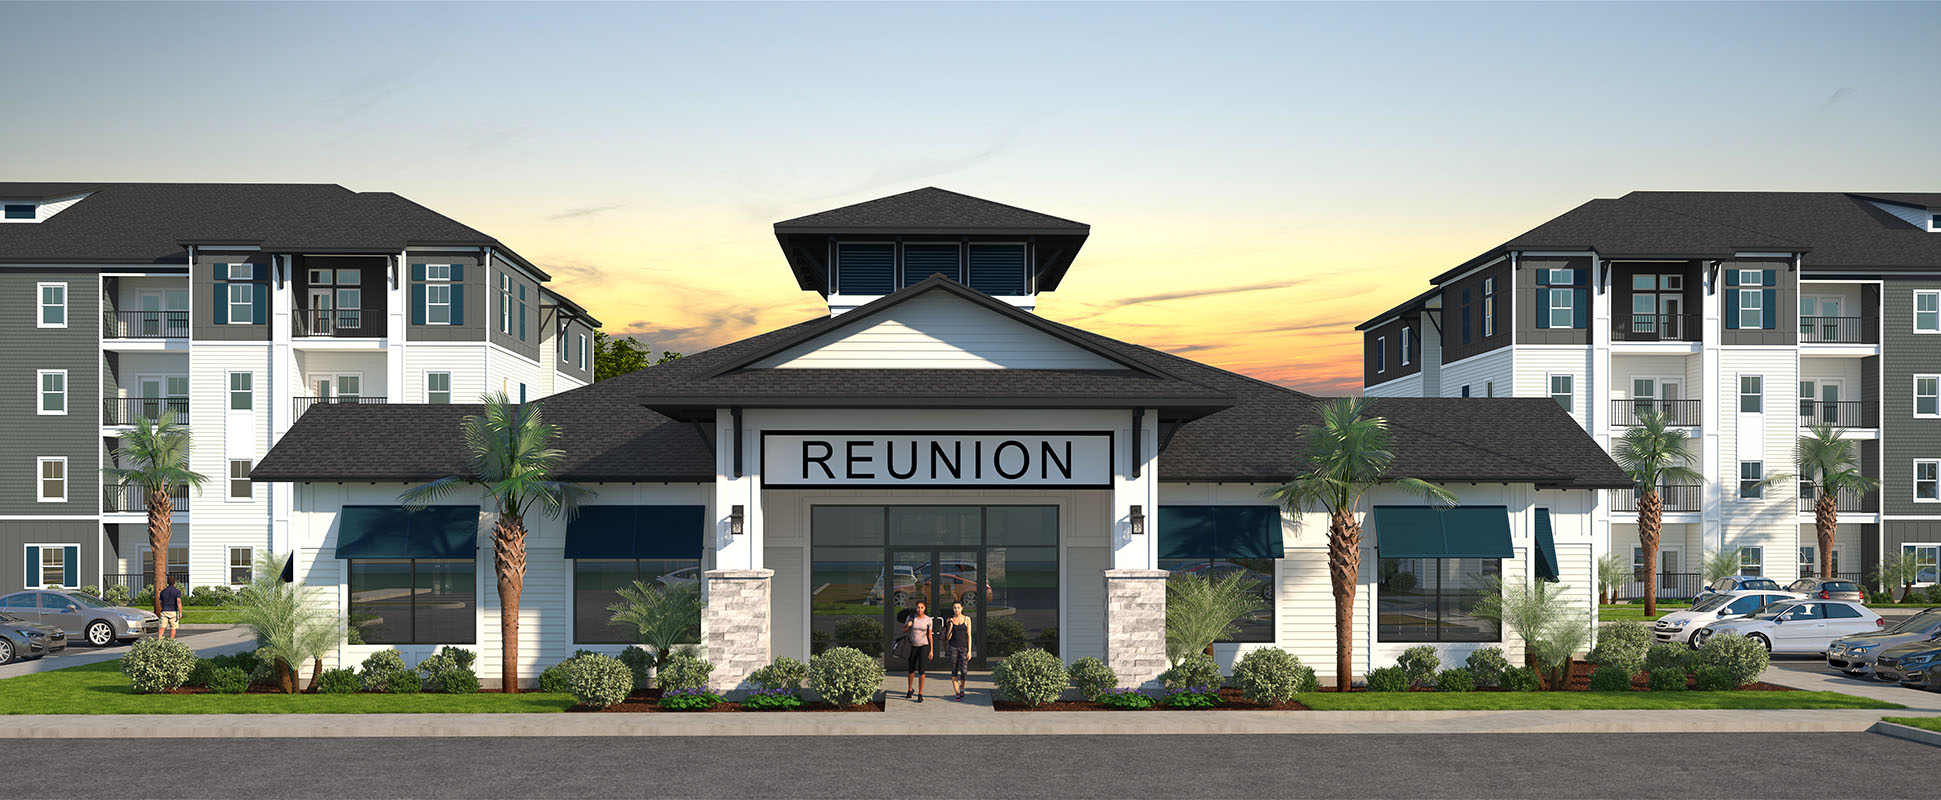 architect's rendering of Reunion apartments in Davenport Florida